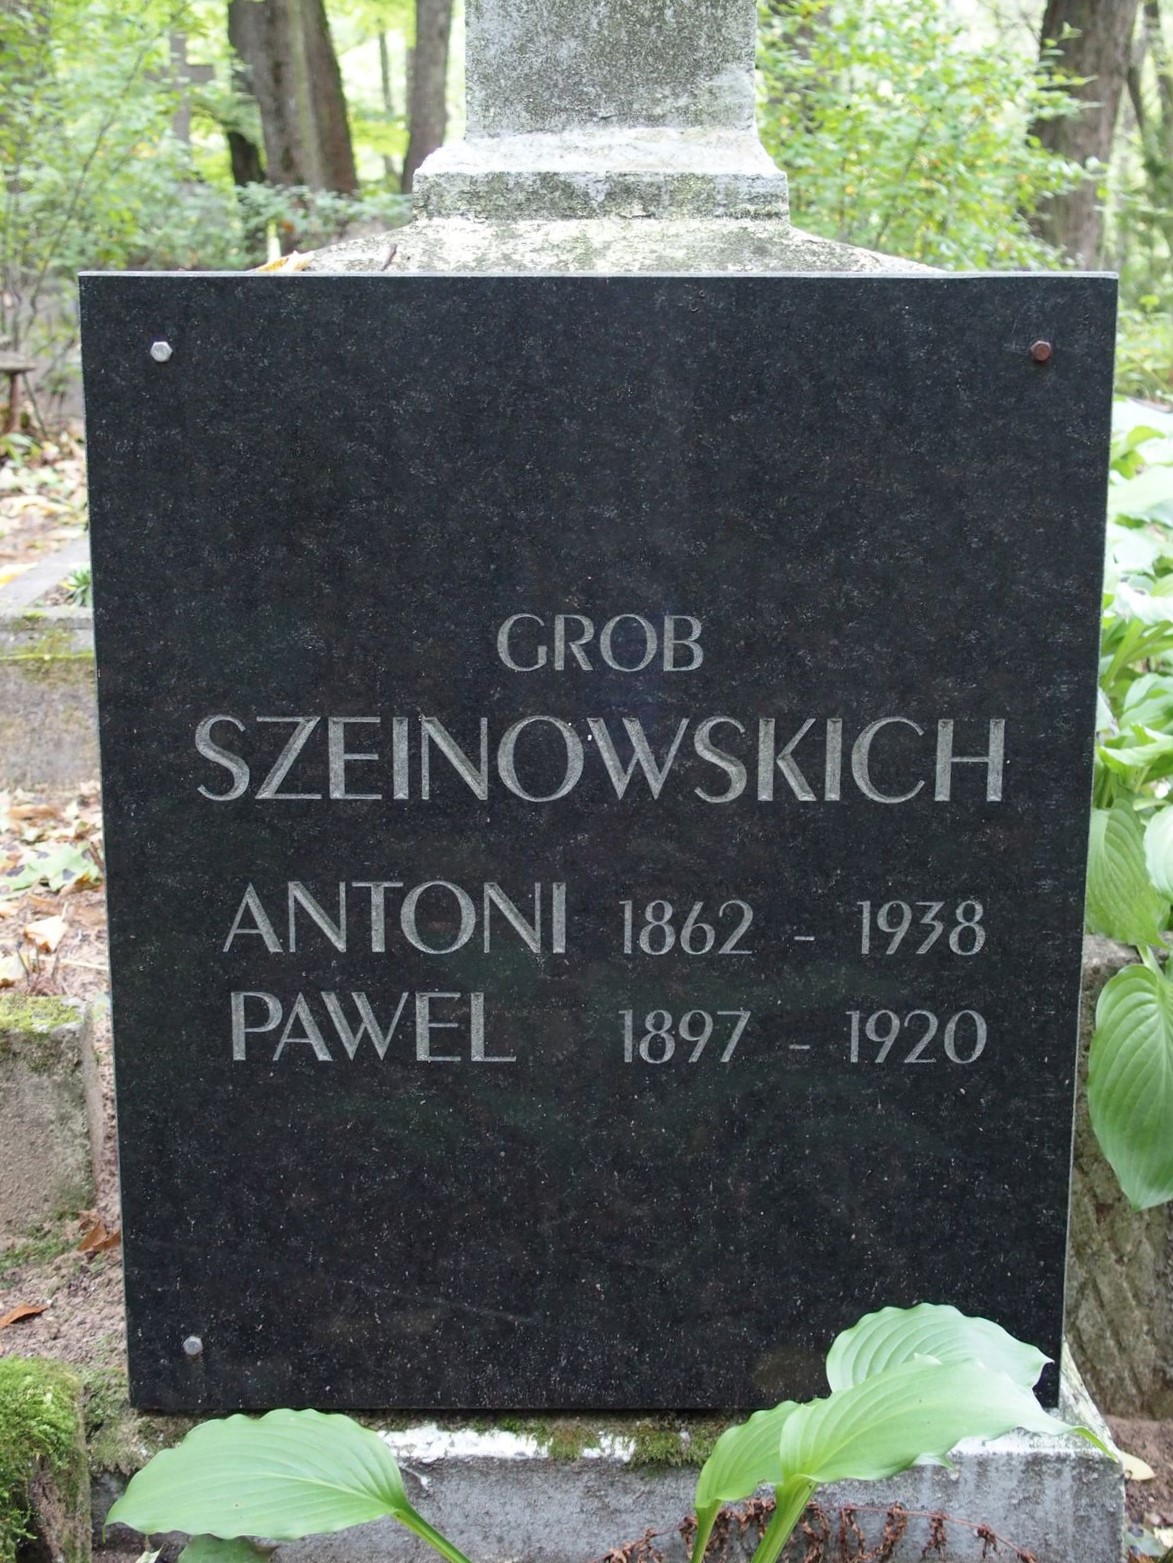 Inscription from the tombstone of Antoni Szeinovsky and Pavel Szeinovsky, St Michael's cemetery in Riga, as of 2021.